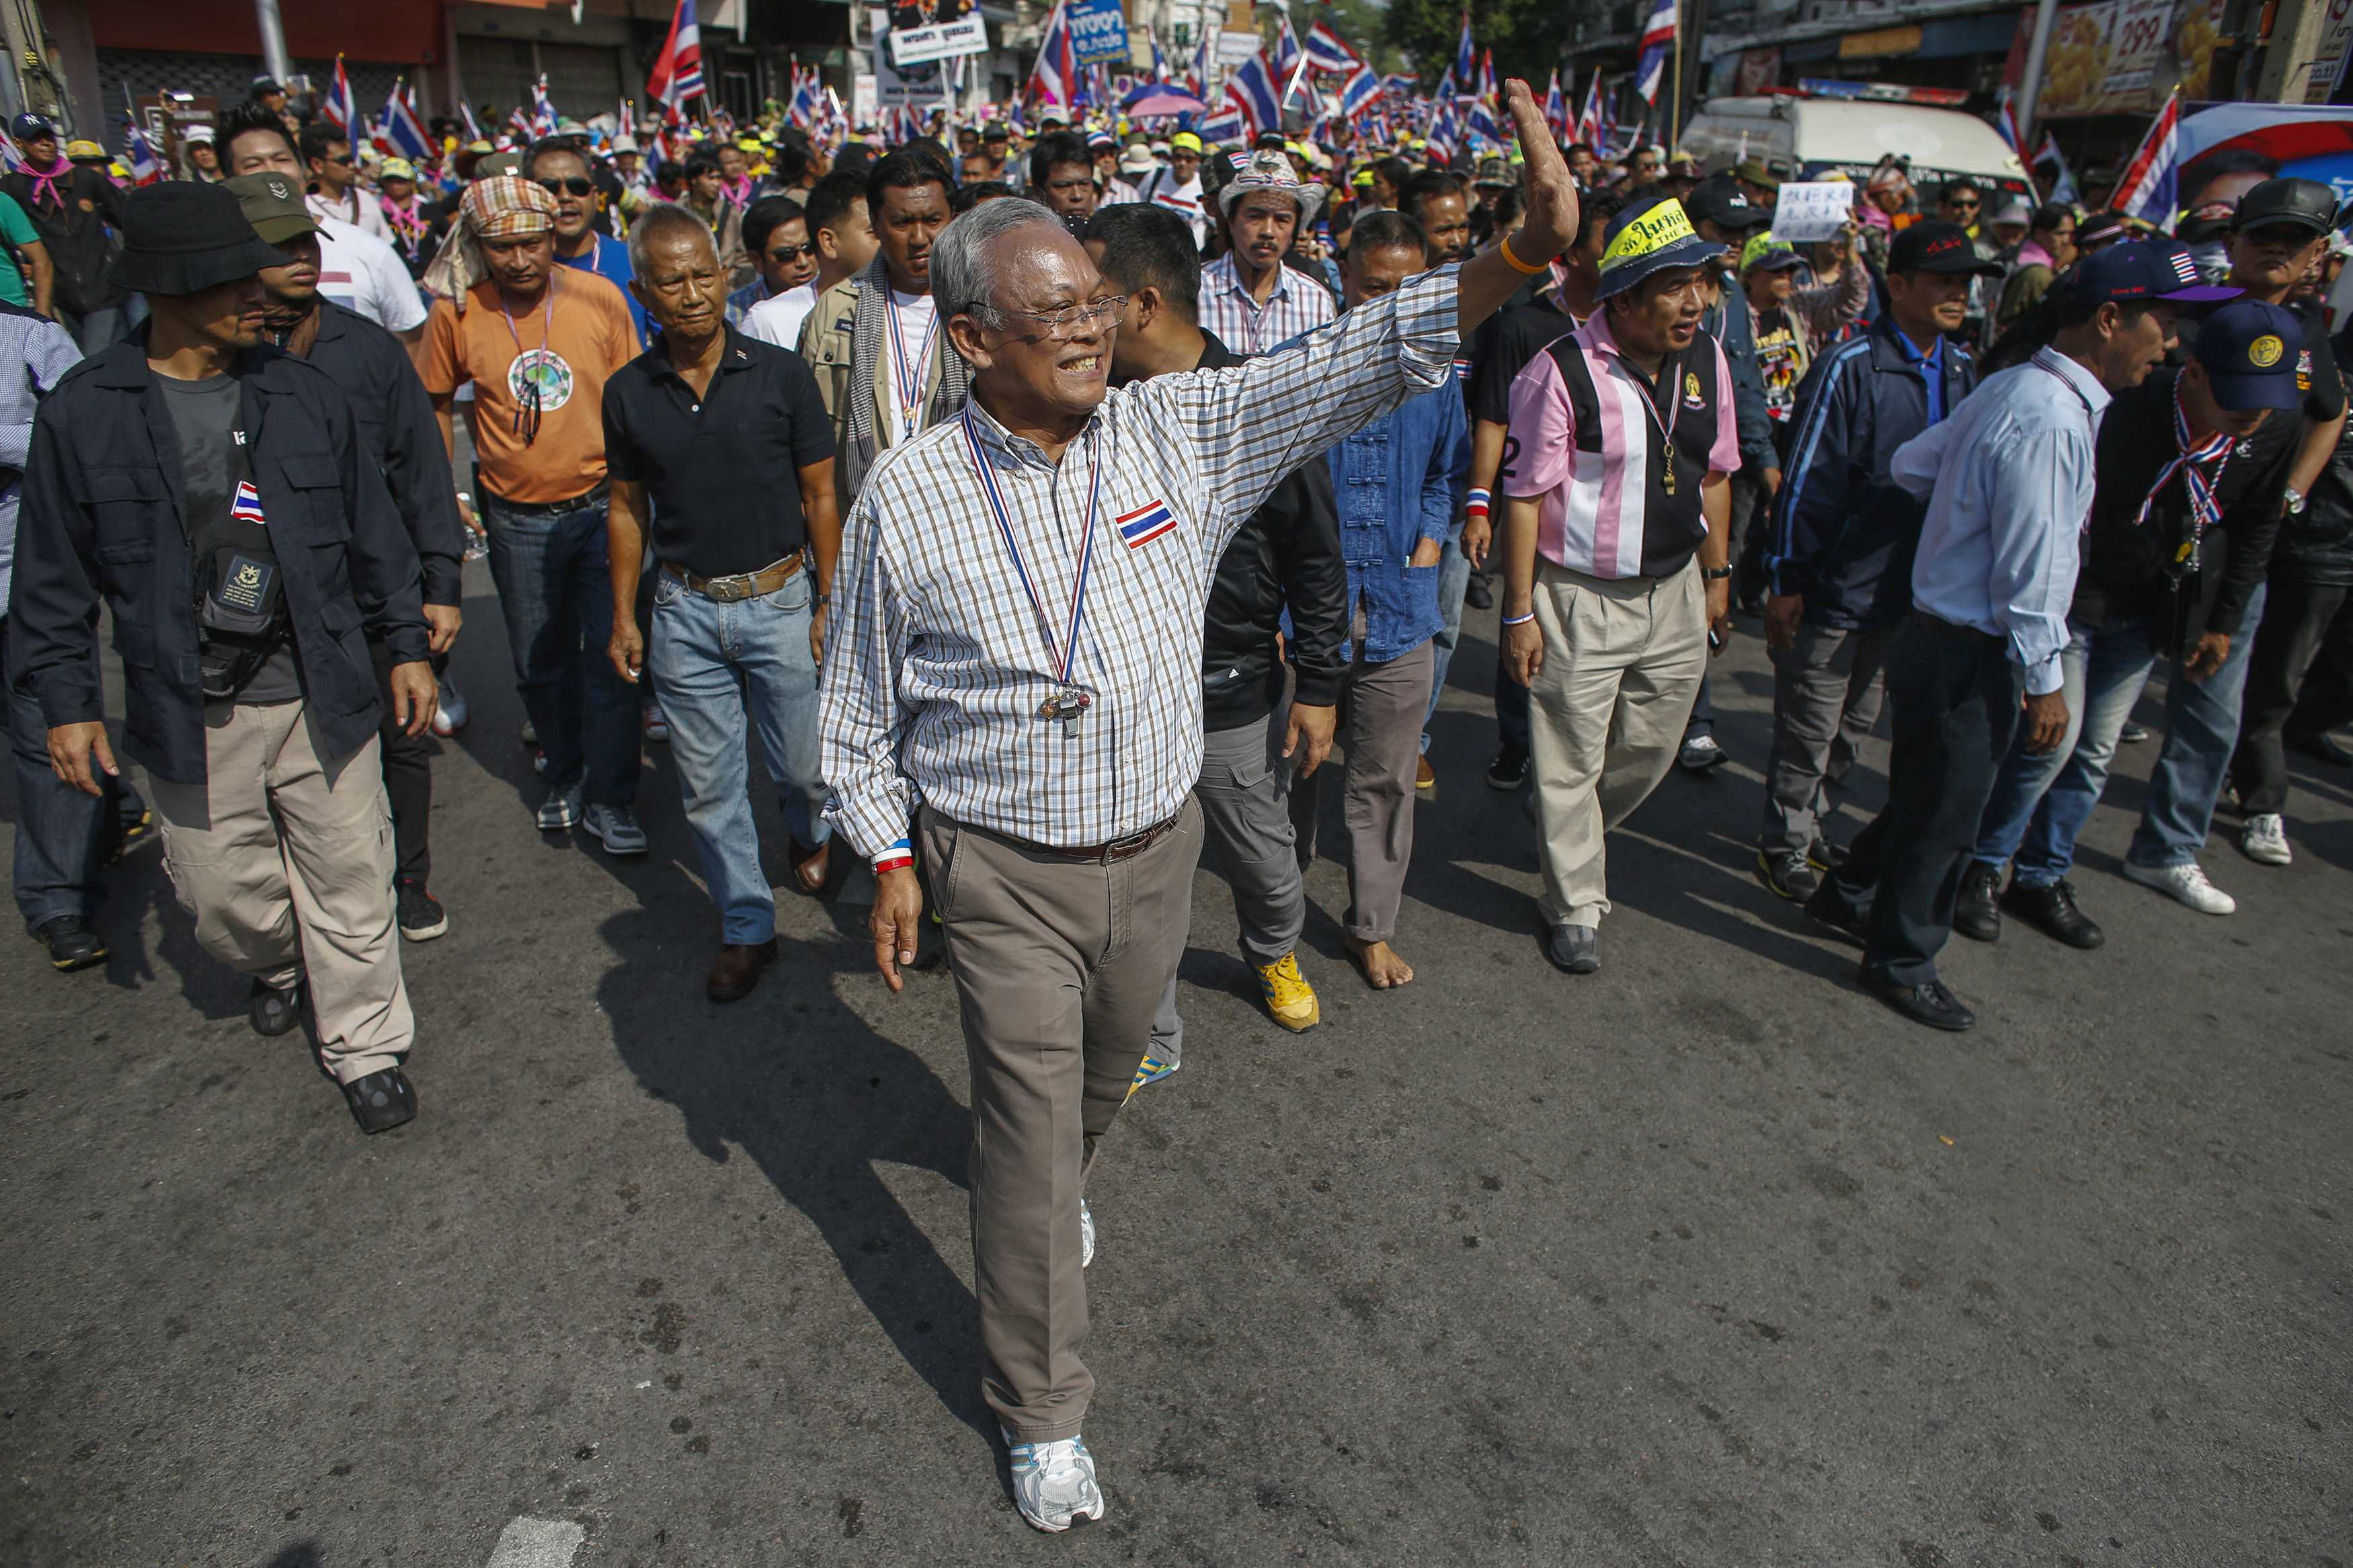 Thai protesters march again in bid to bring down government